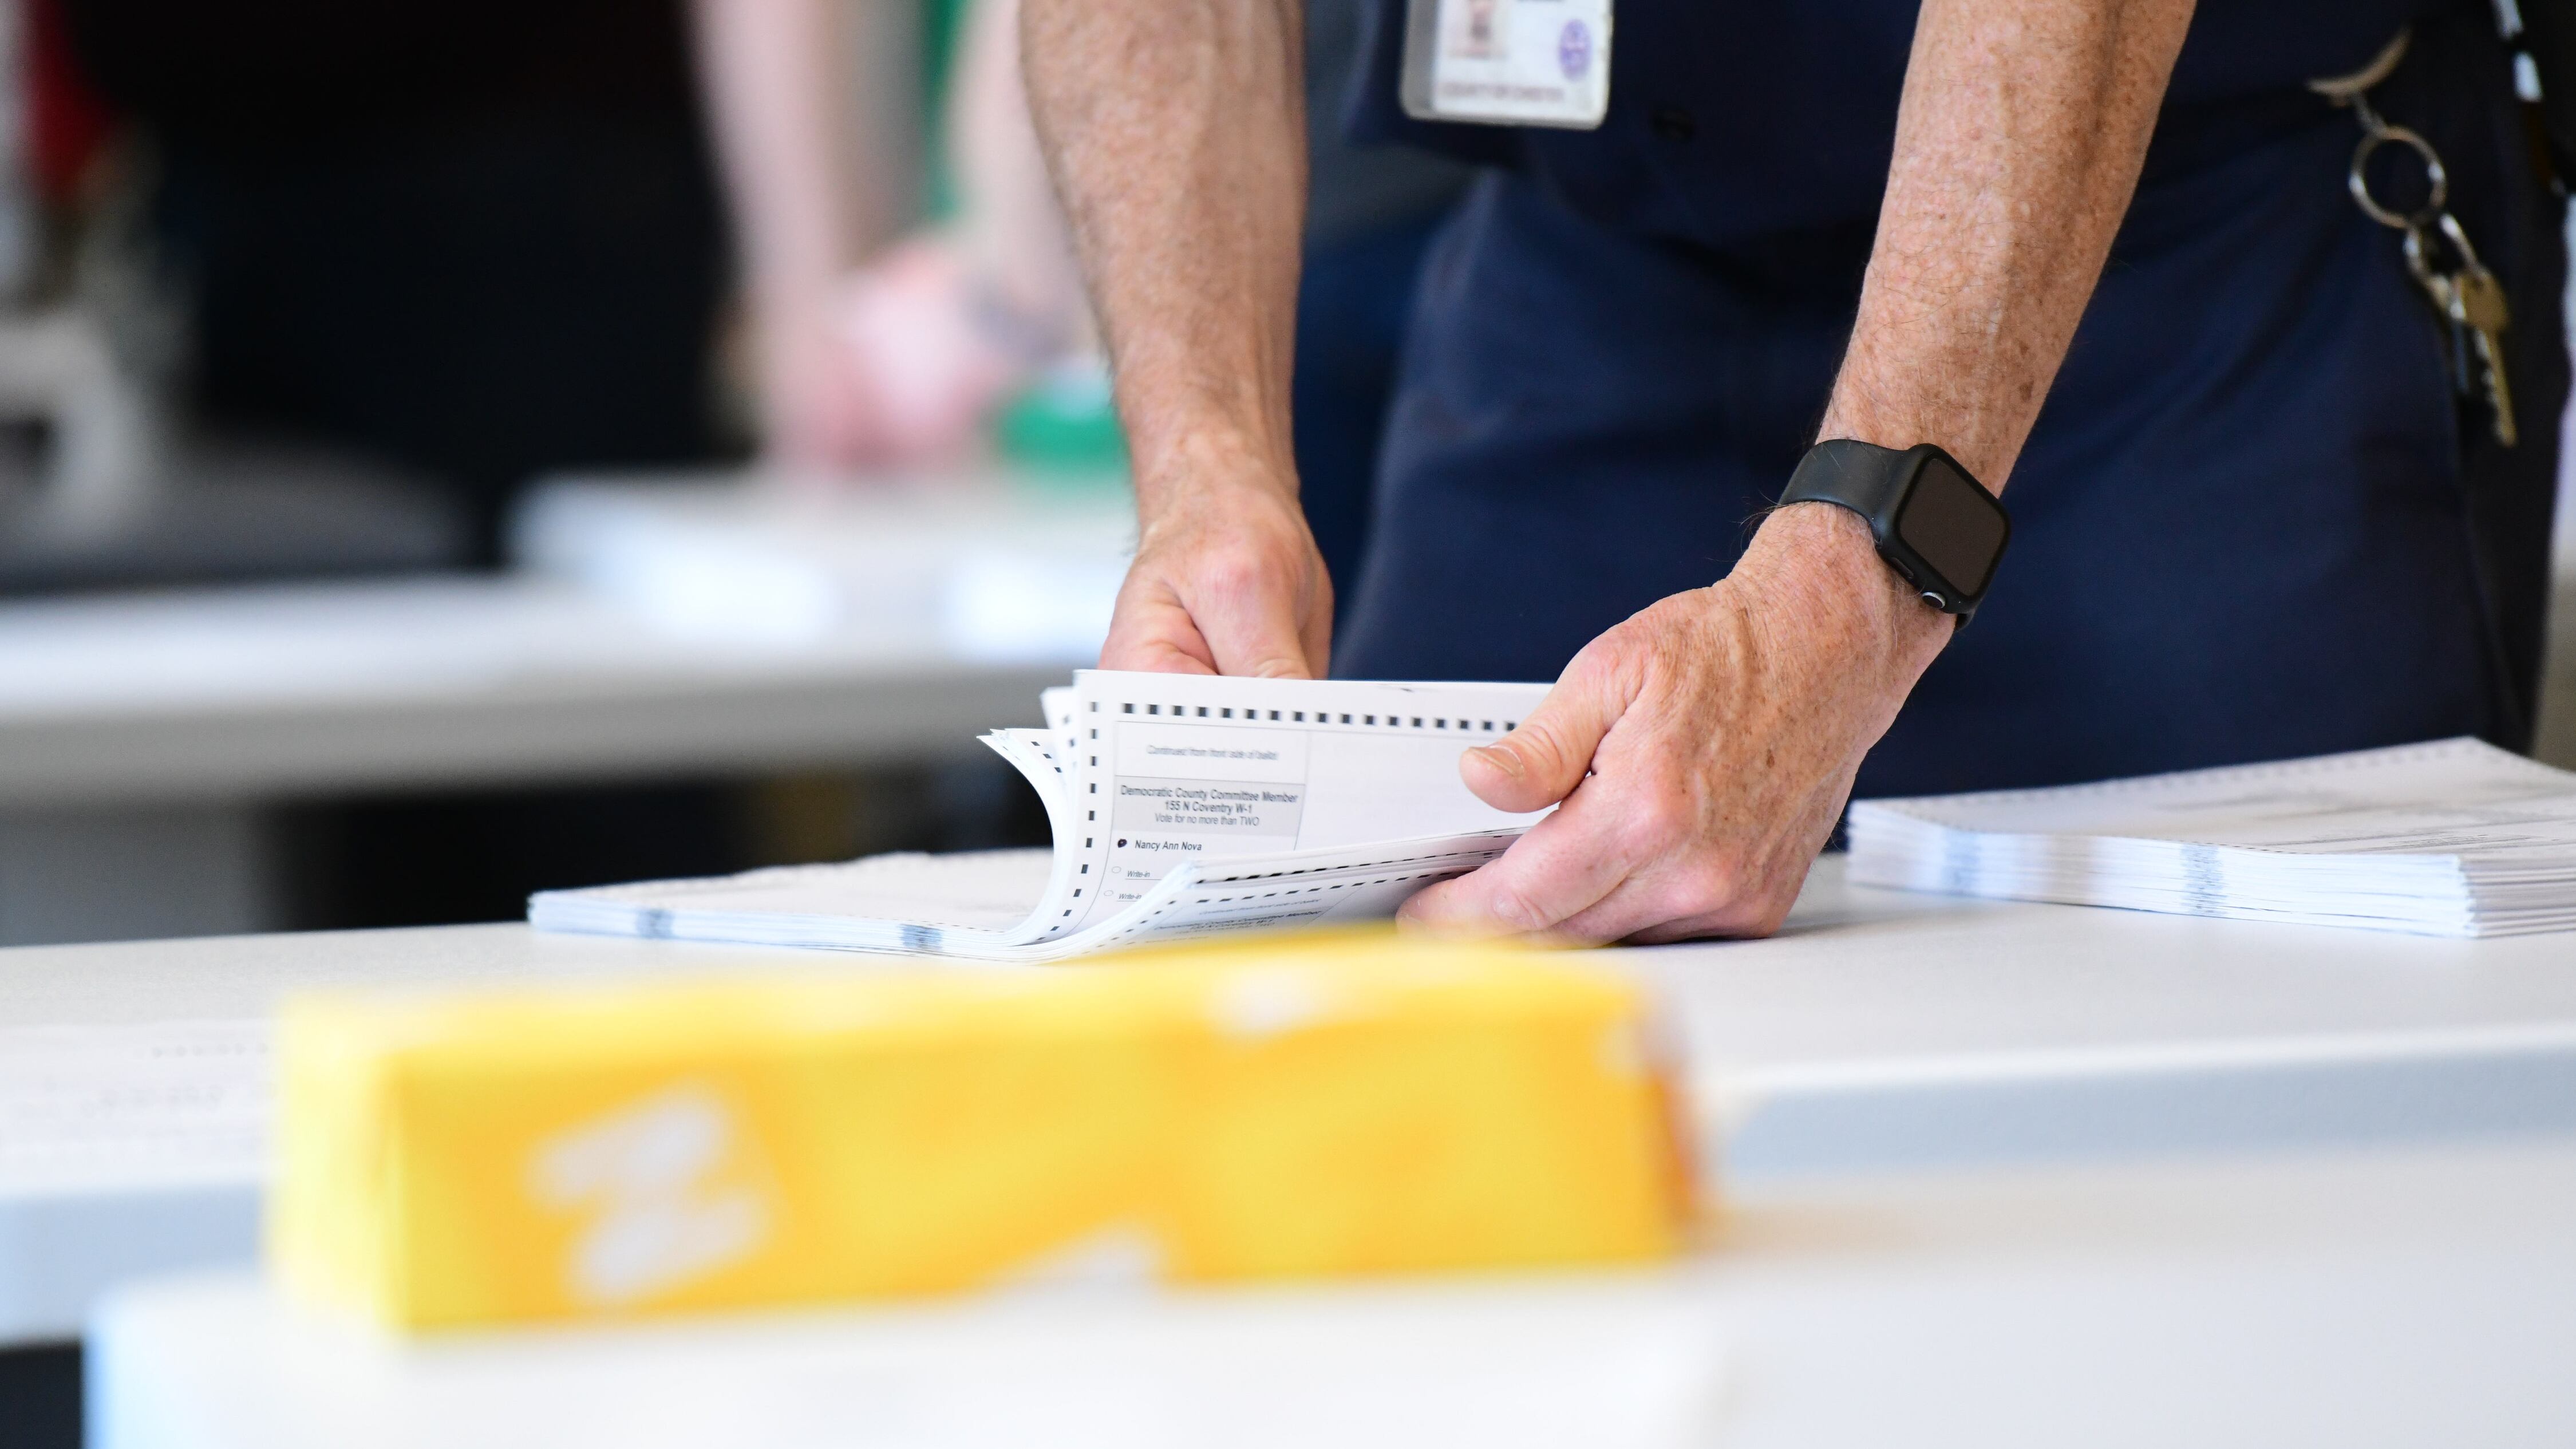 County officials perform a ballot recount on June 2, 2022 in West Chester, Pennsylvania.